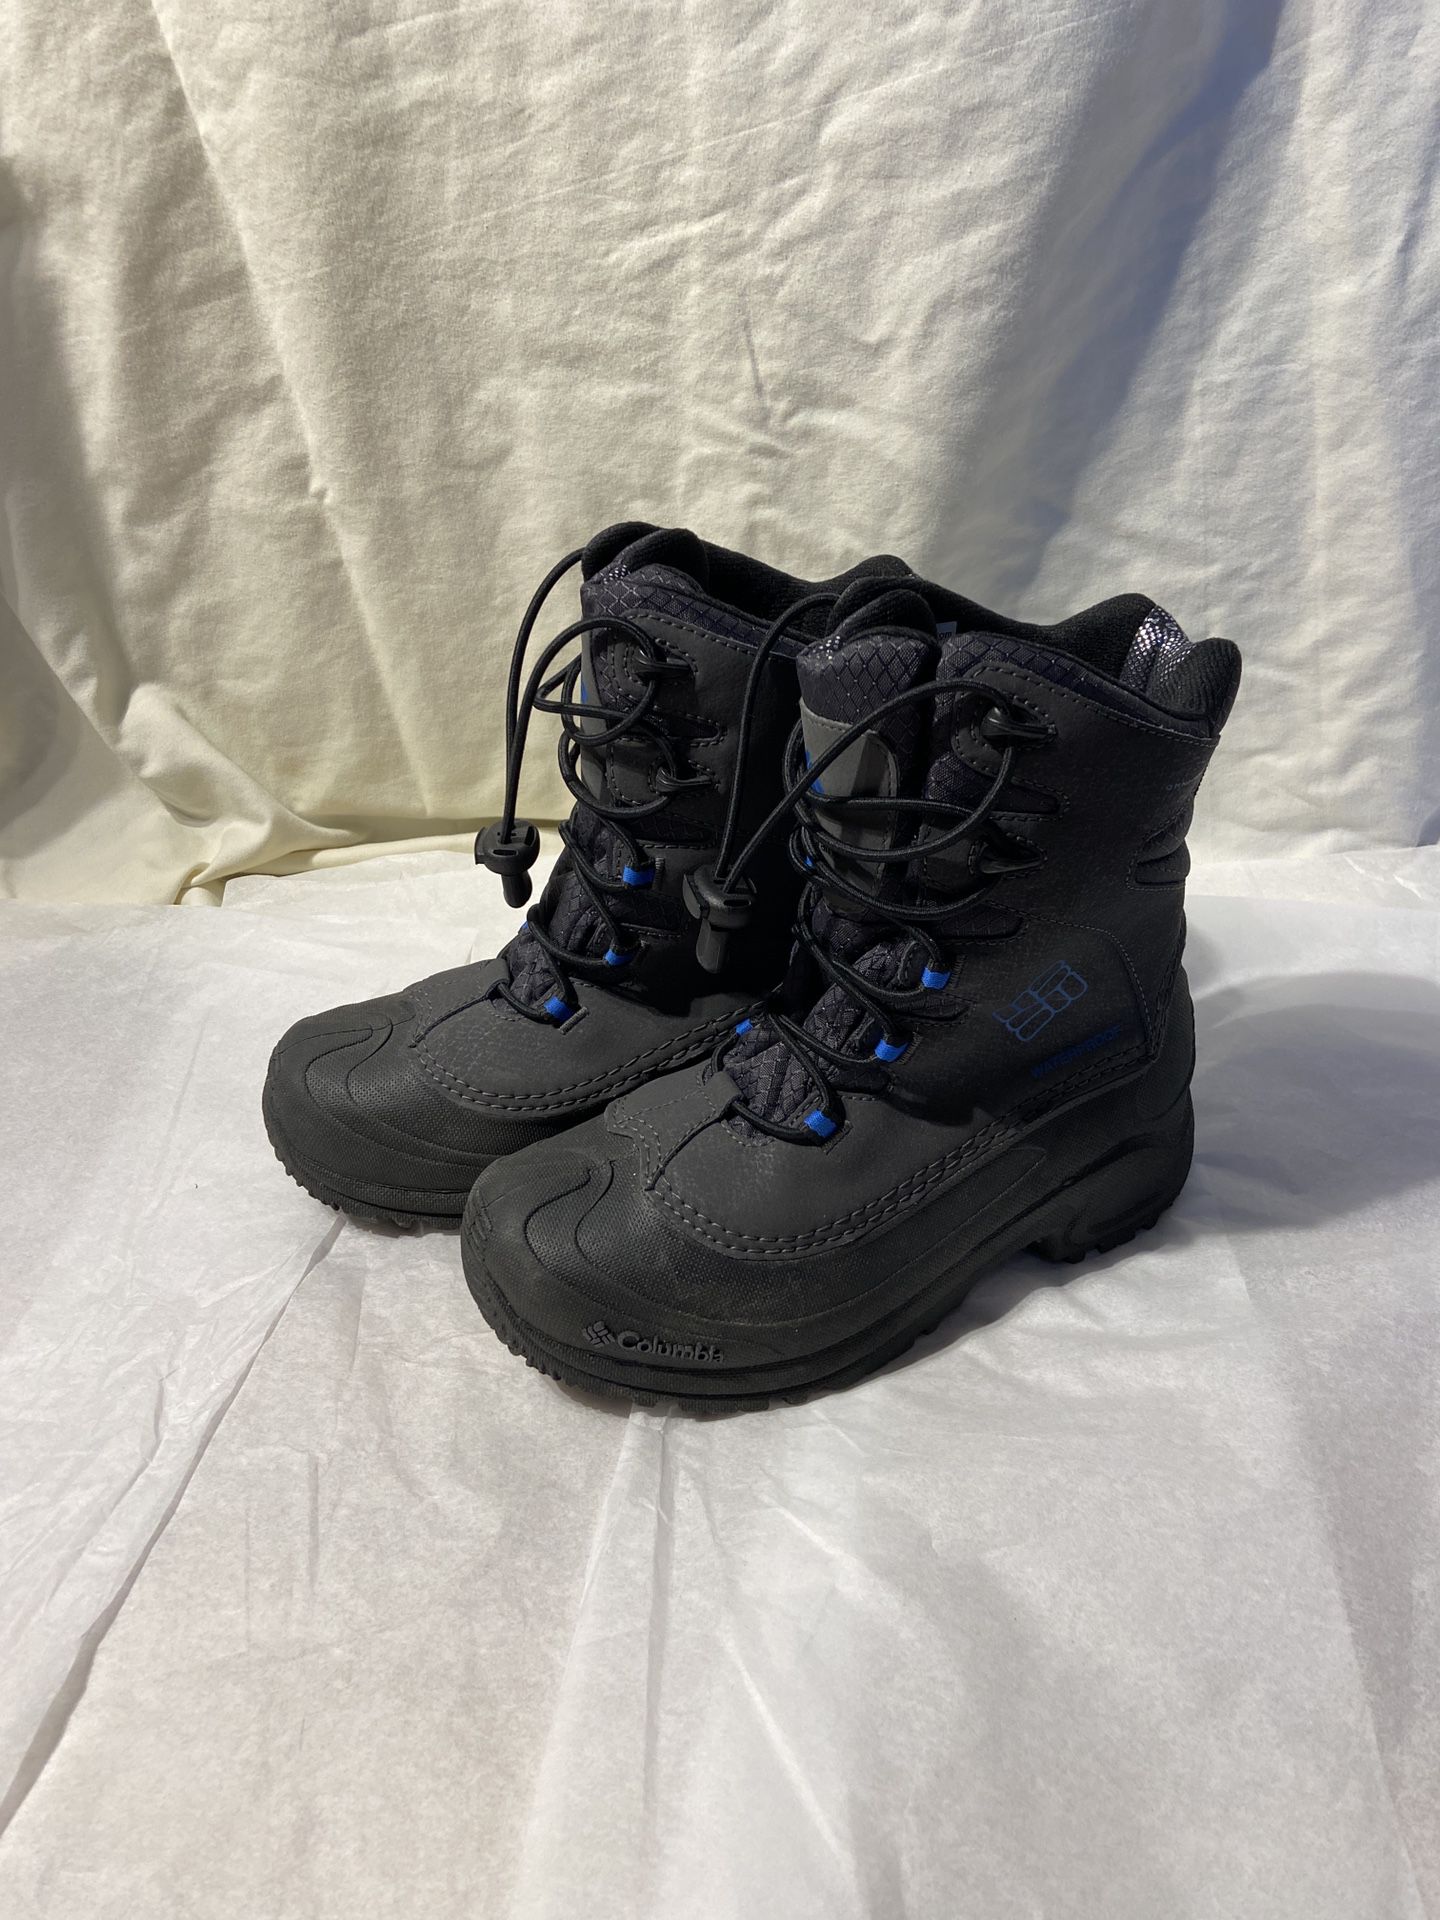 Columbia 200 Gram Boots Childrens Size 4